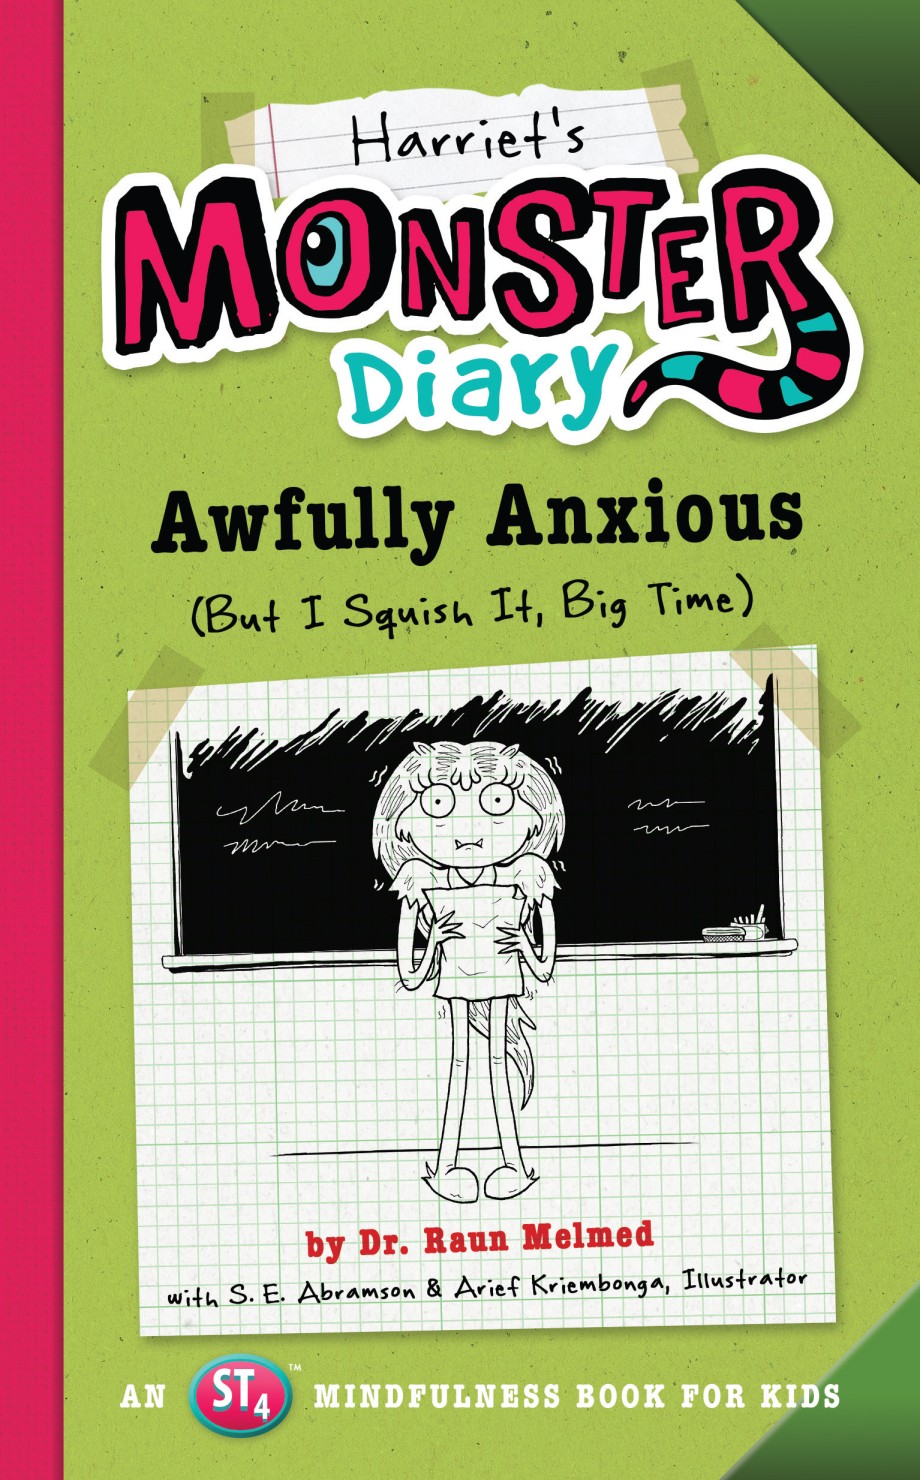 Harriet's Monster Diary Awfully Anxious (But I Squish It, Big Time)